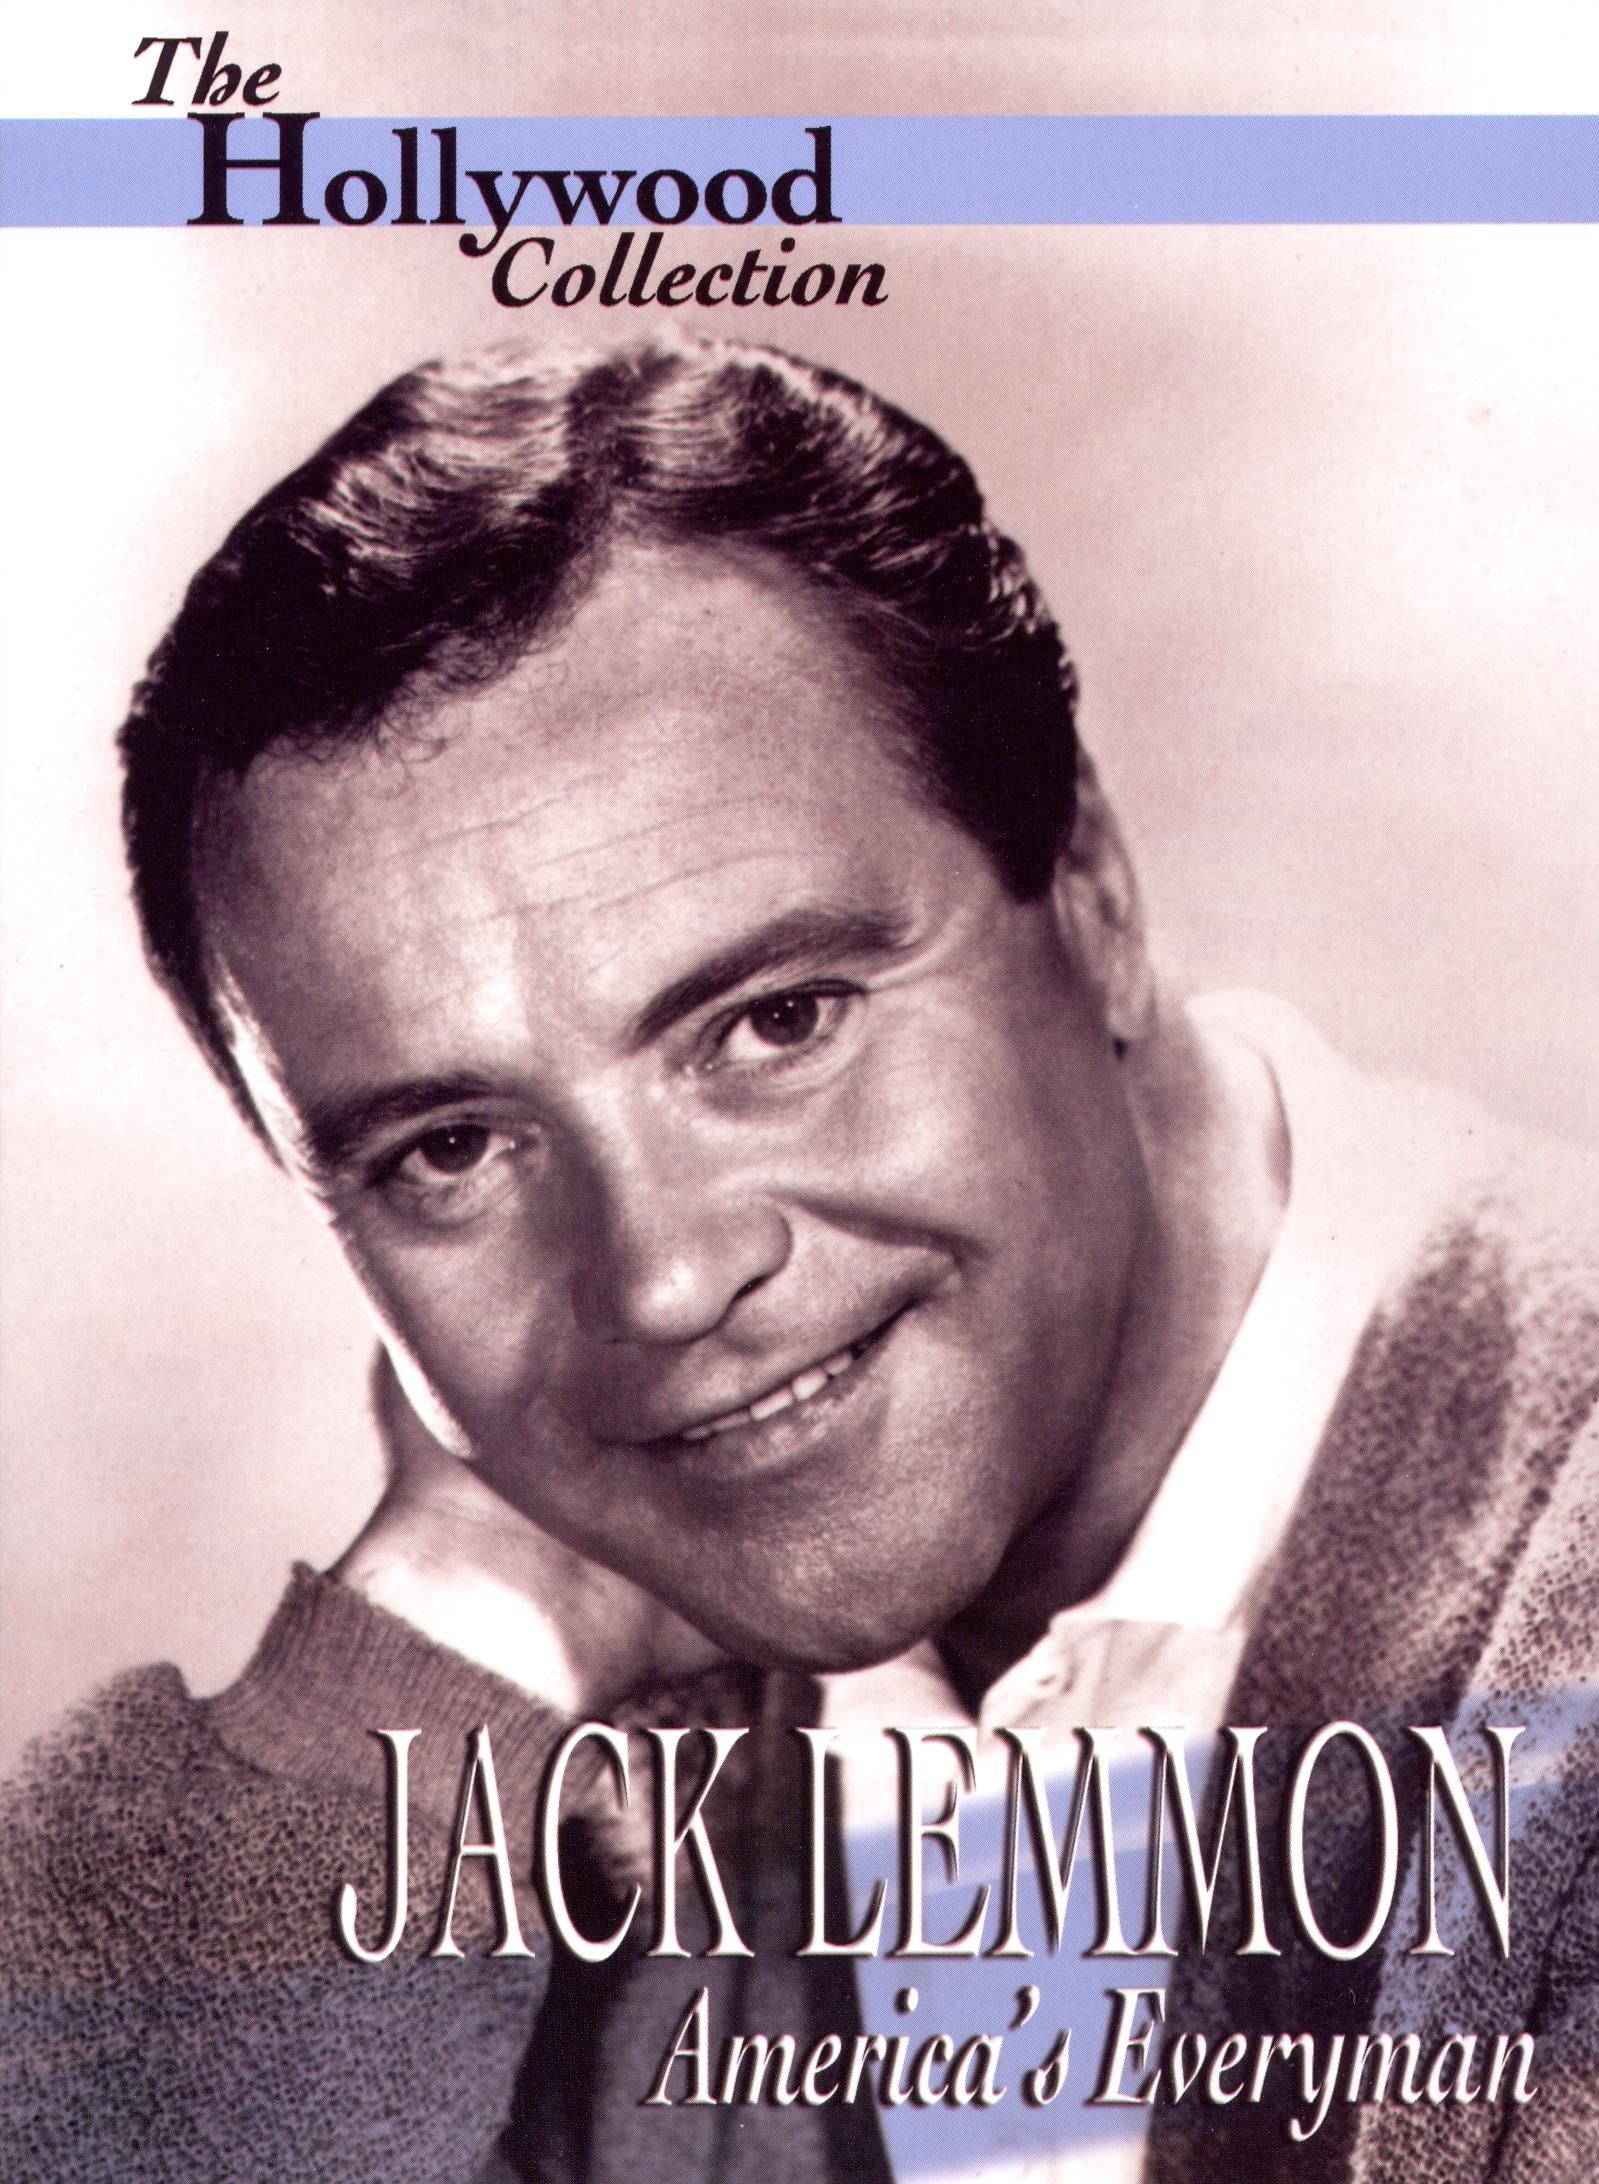 Hollywood Collection: Jack Lemmon - America's Everyman cover art